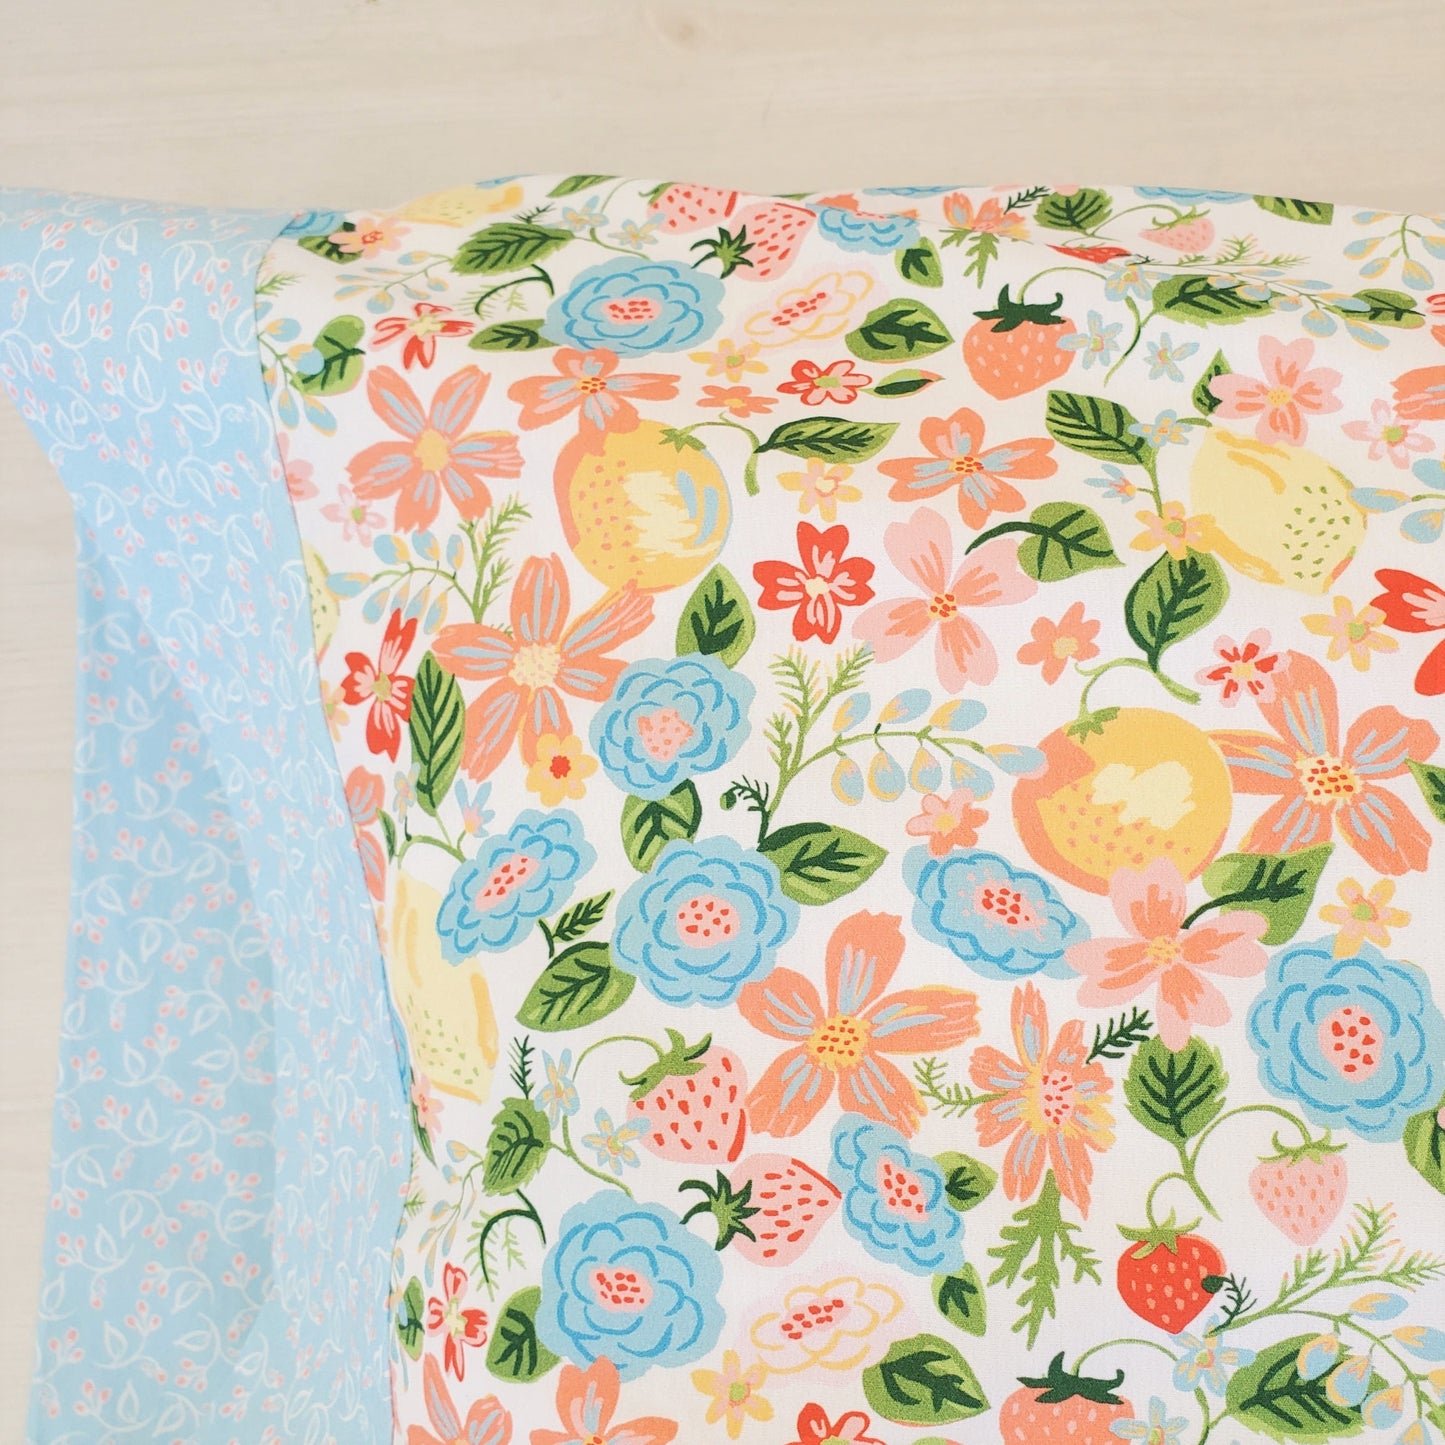 Organic Cotton Pillowcases in Floral & Fruit Print